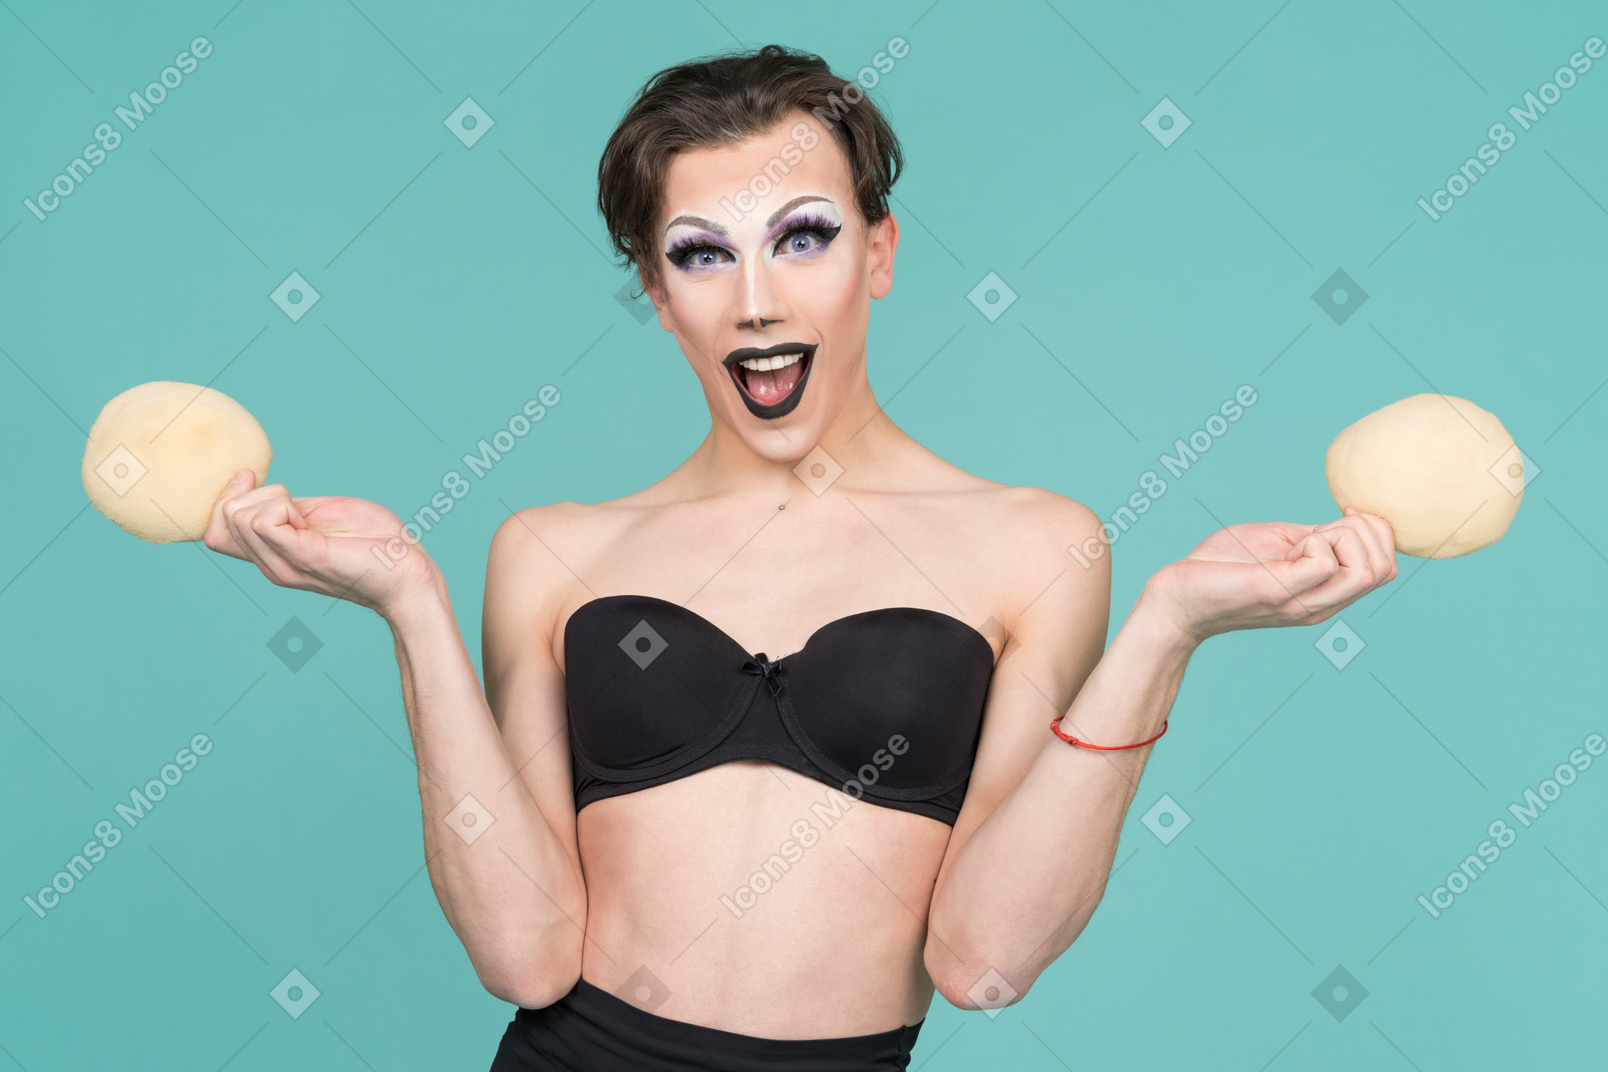 Drag queen looking excited and holding bra inserts